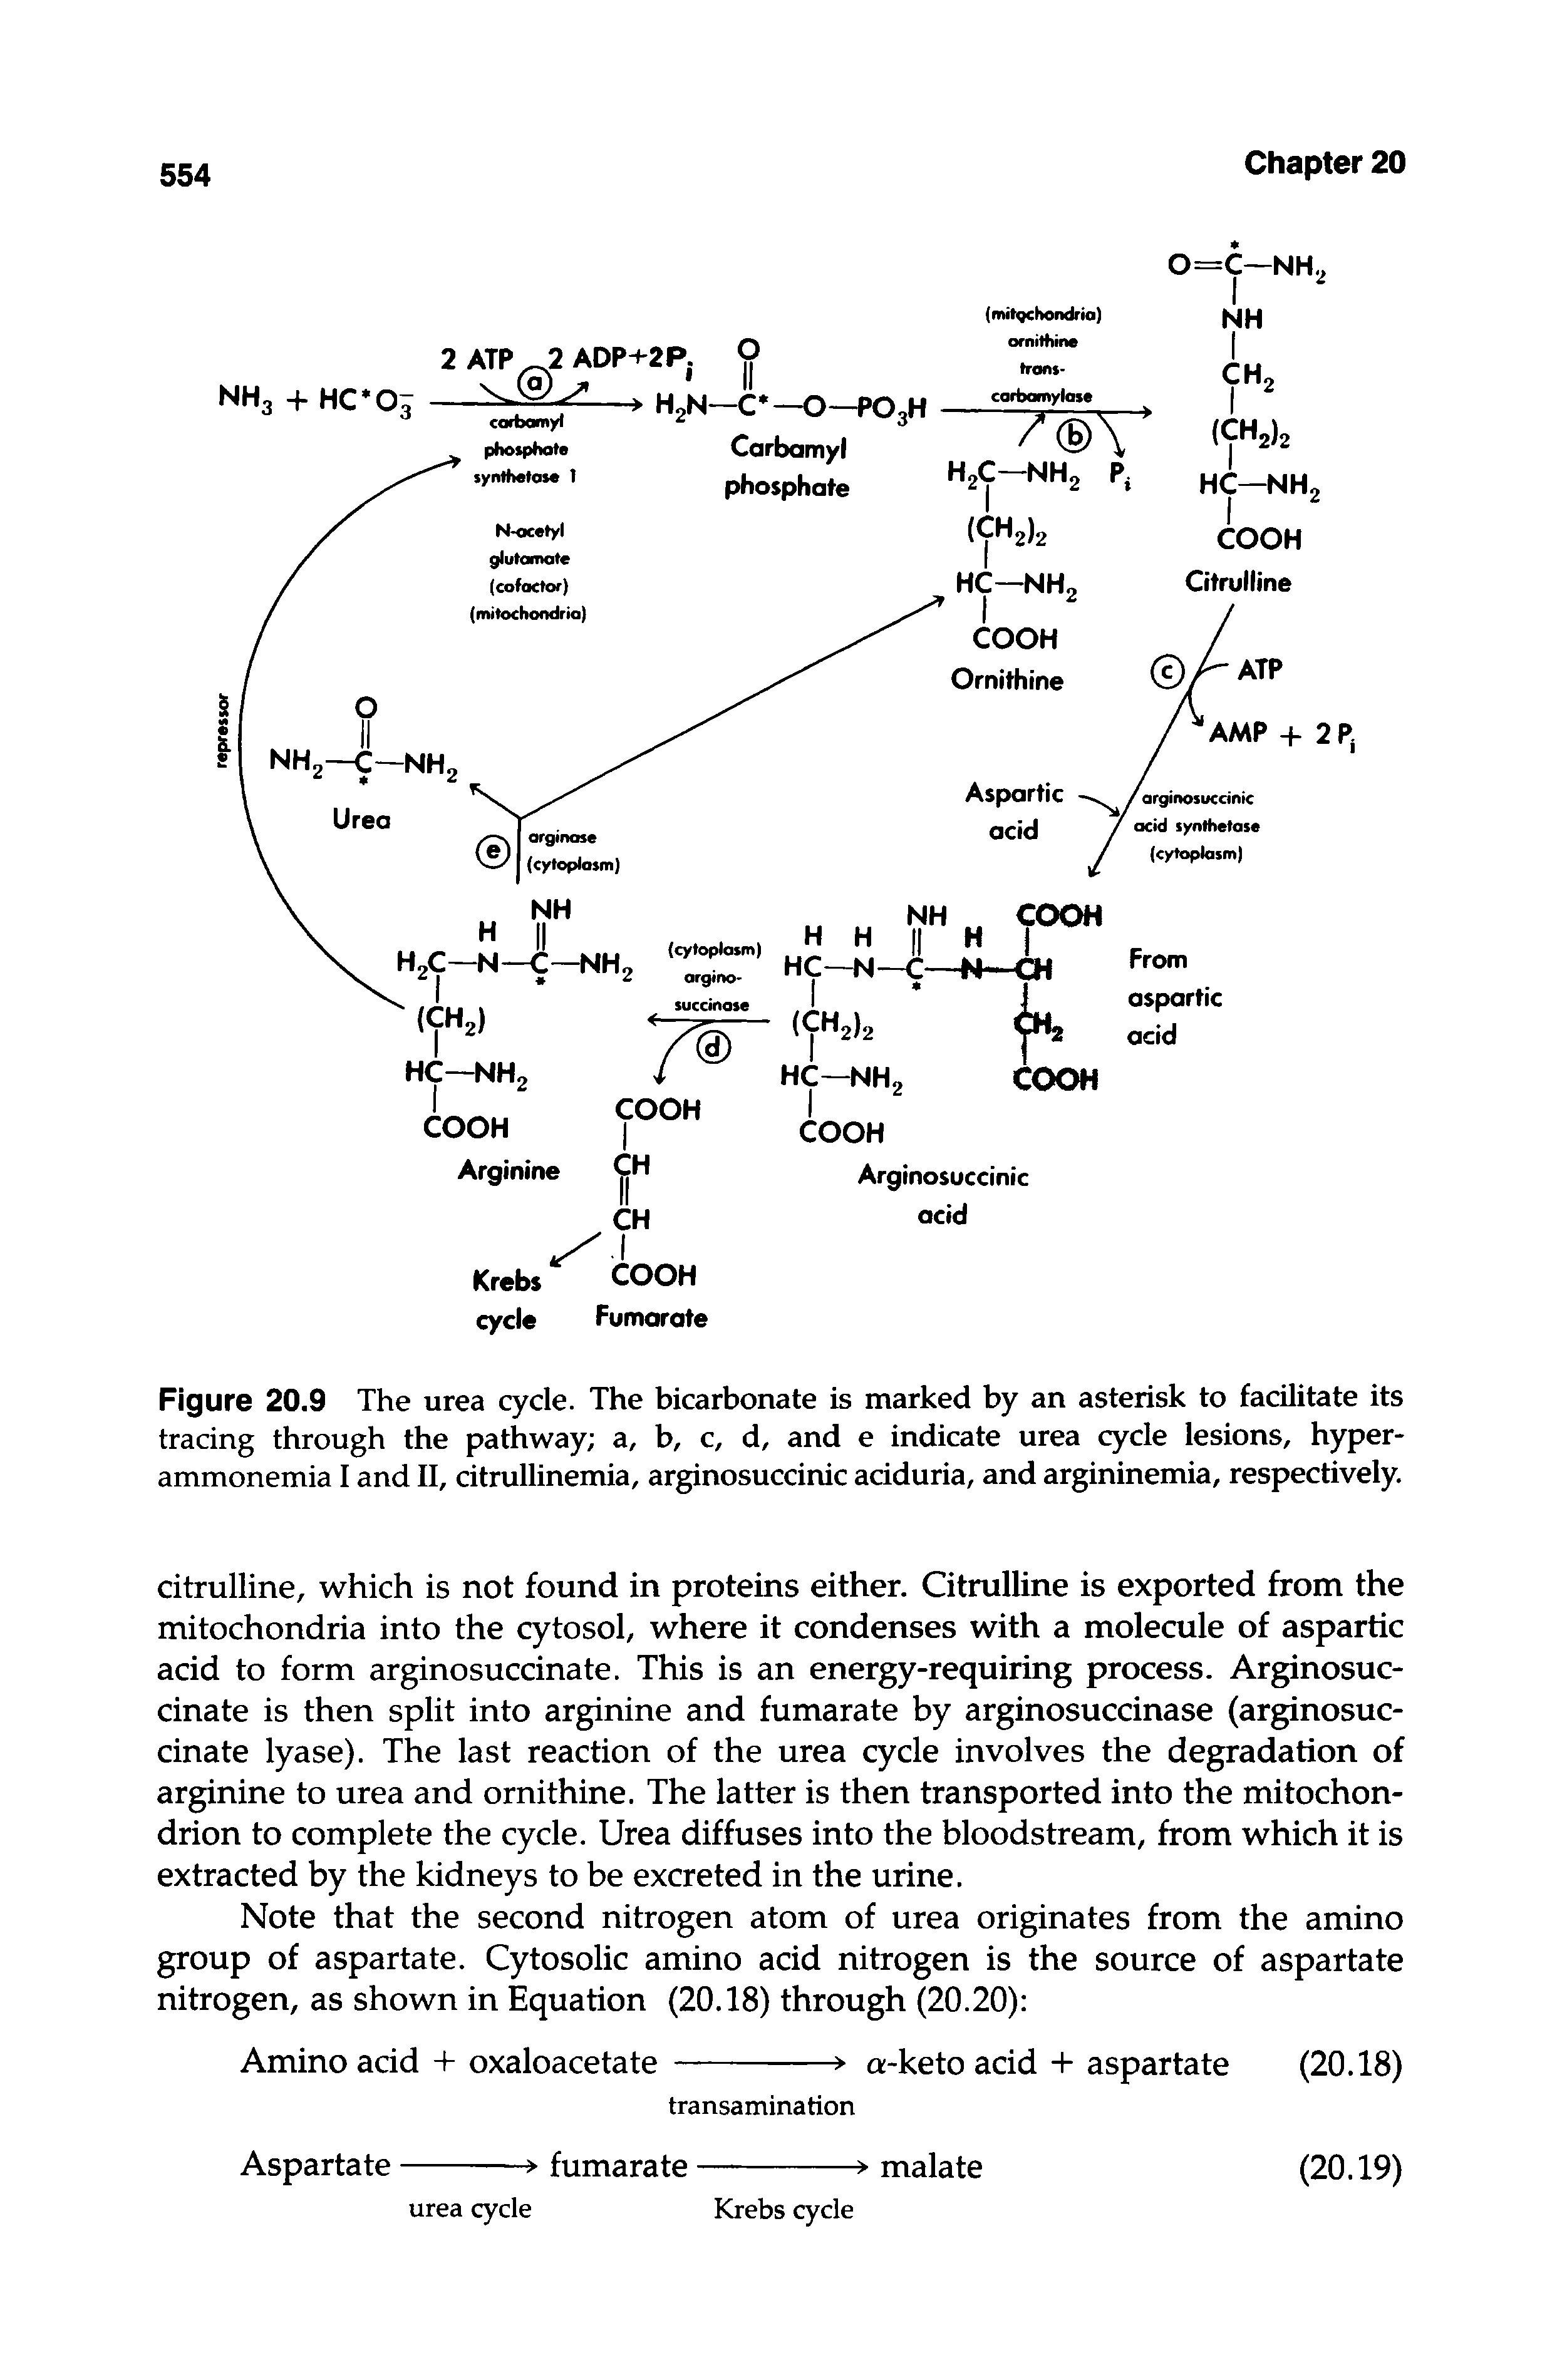 Figure 20.9 The urea cycle. The bicarbonate is marked by an asterisk to facilitate its tracing through the pathway a, b, c, d, and e indicate urea cycle lesions, hyperammonemia I and II, citrullinemia, arginosuccinic aciduria, and argininemia, respectively.